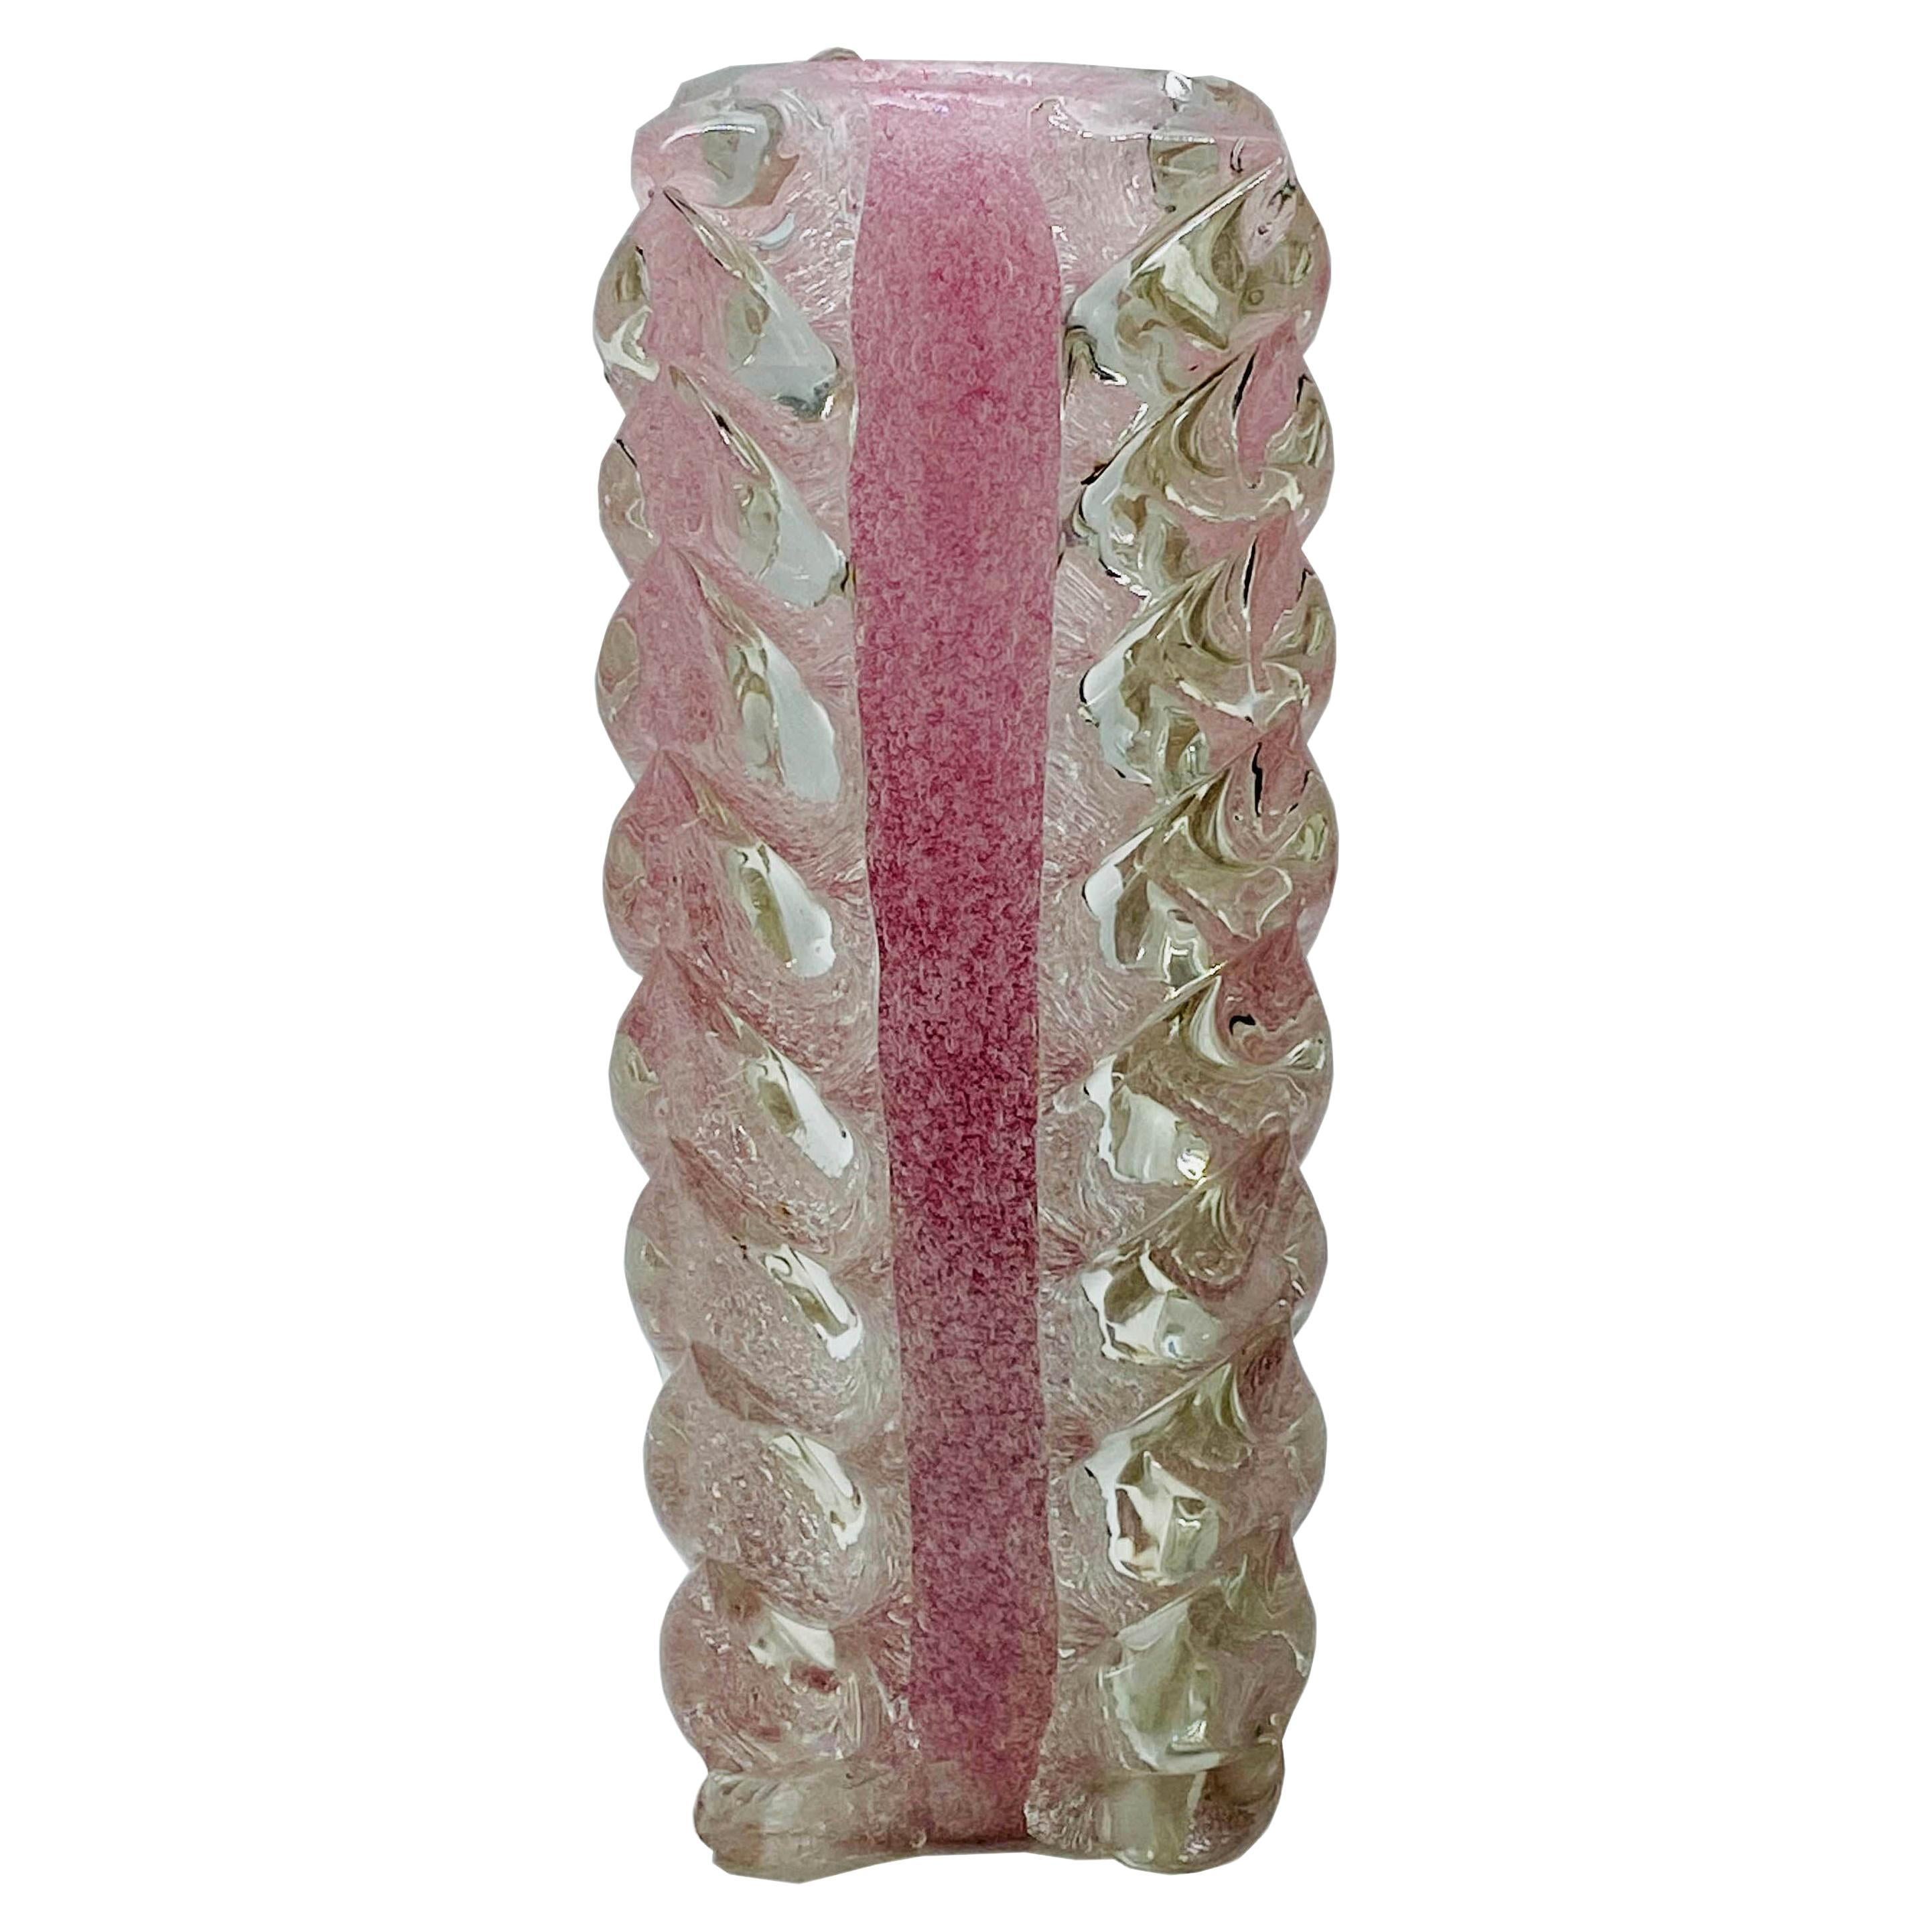 Spuma di Mare Vase by Ercole Barovier for Barovier & Toso, Italy, 1938-1940 For Sale